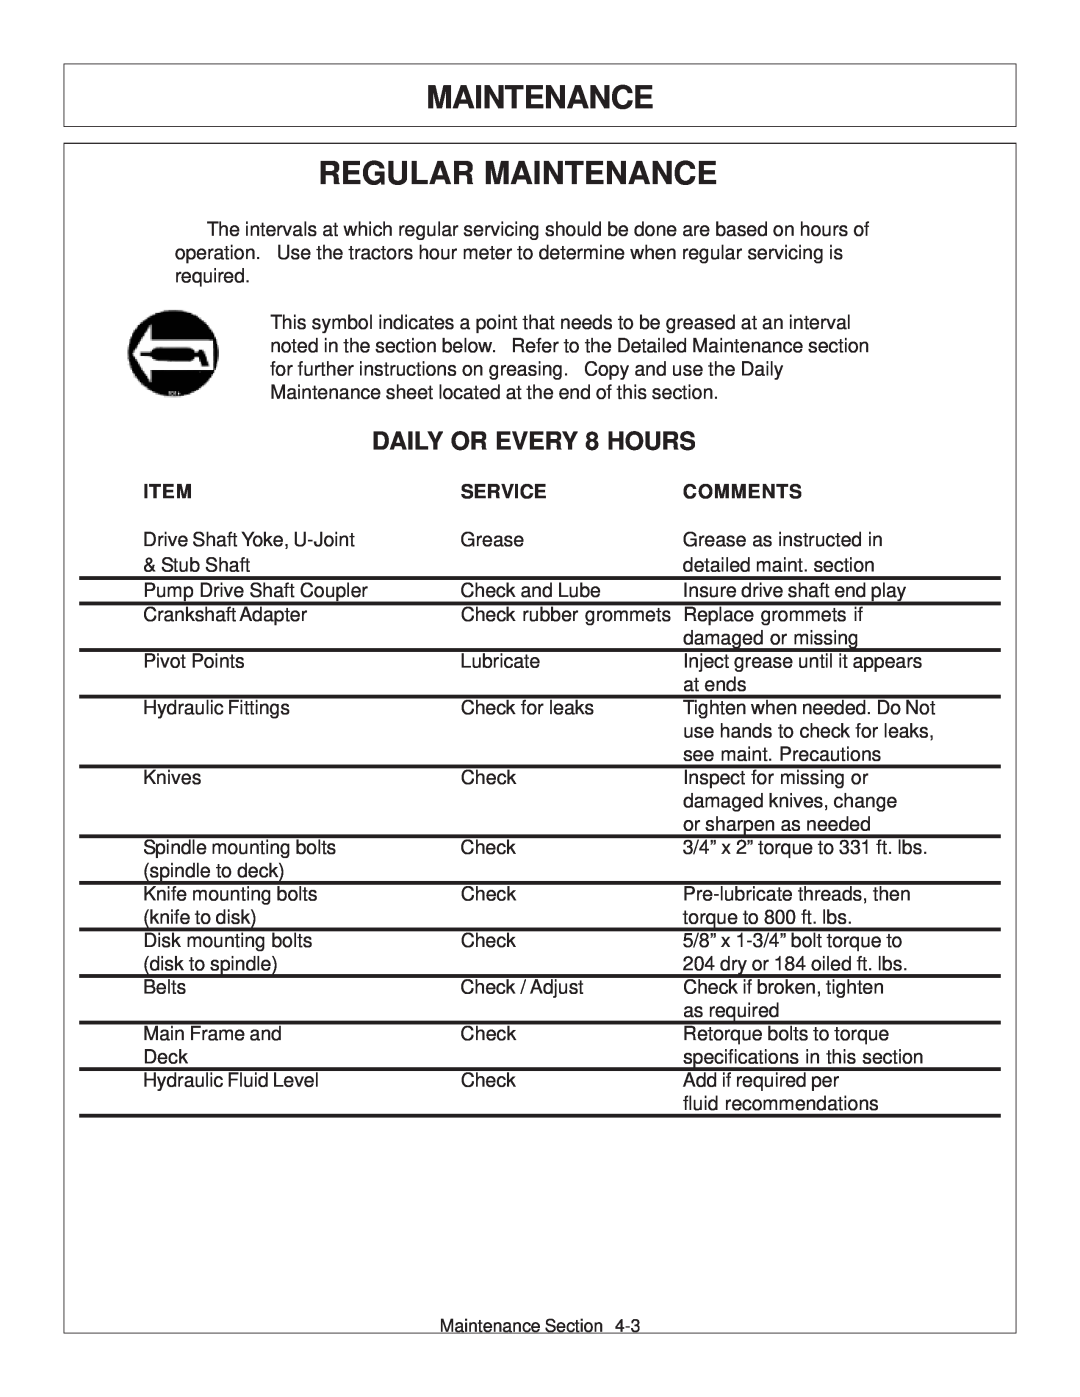 Tiger Products Co., Ltd JD 72-7520 manual Maintenance Regular Maintenance, DAILY OR EVERY 8 HOURS, Service, Comments 